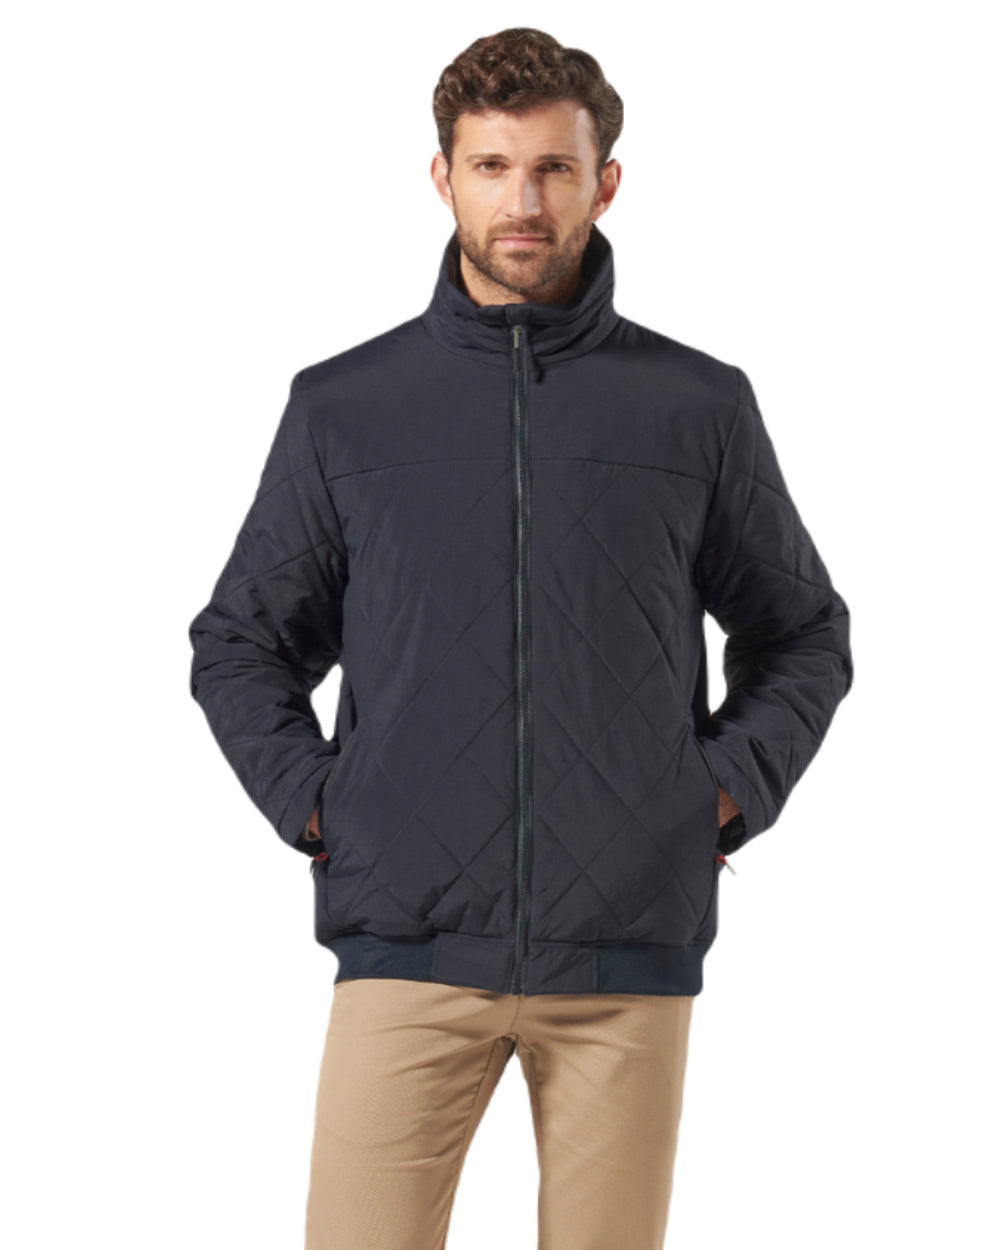 Navy Coloured Musto Mens Snug Diamond Quilted Jacket On A White Background 